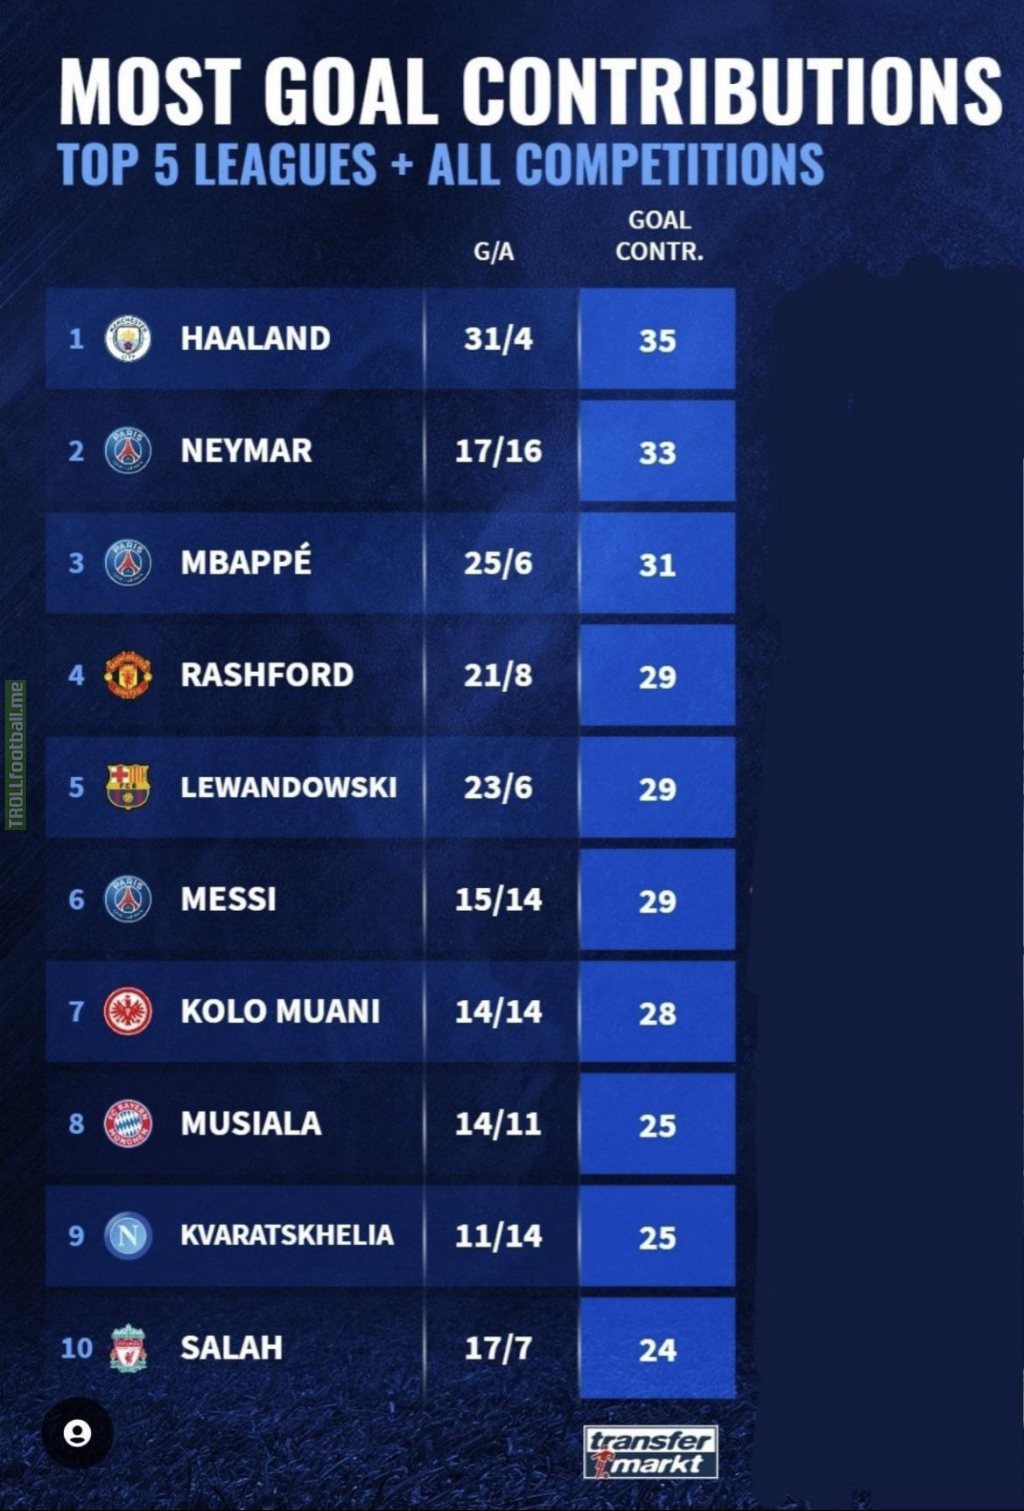 Most goal contributions in Europe’s top 5 leagues